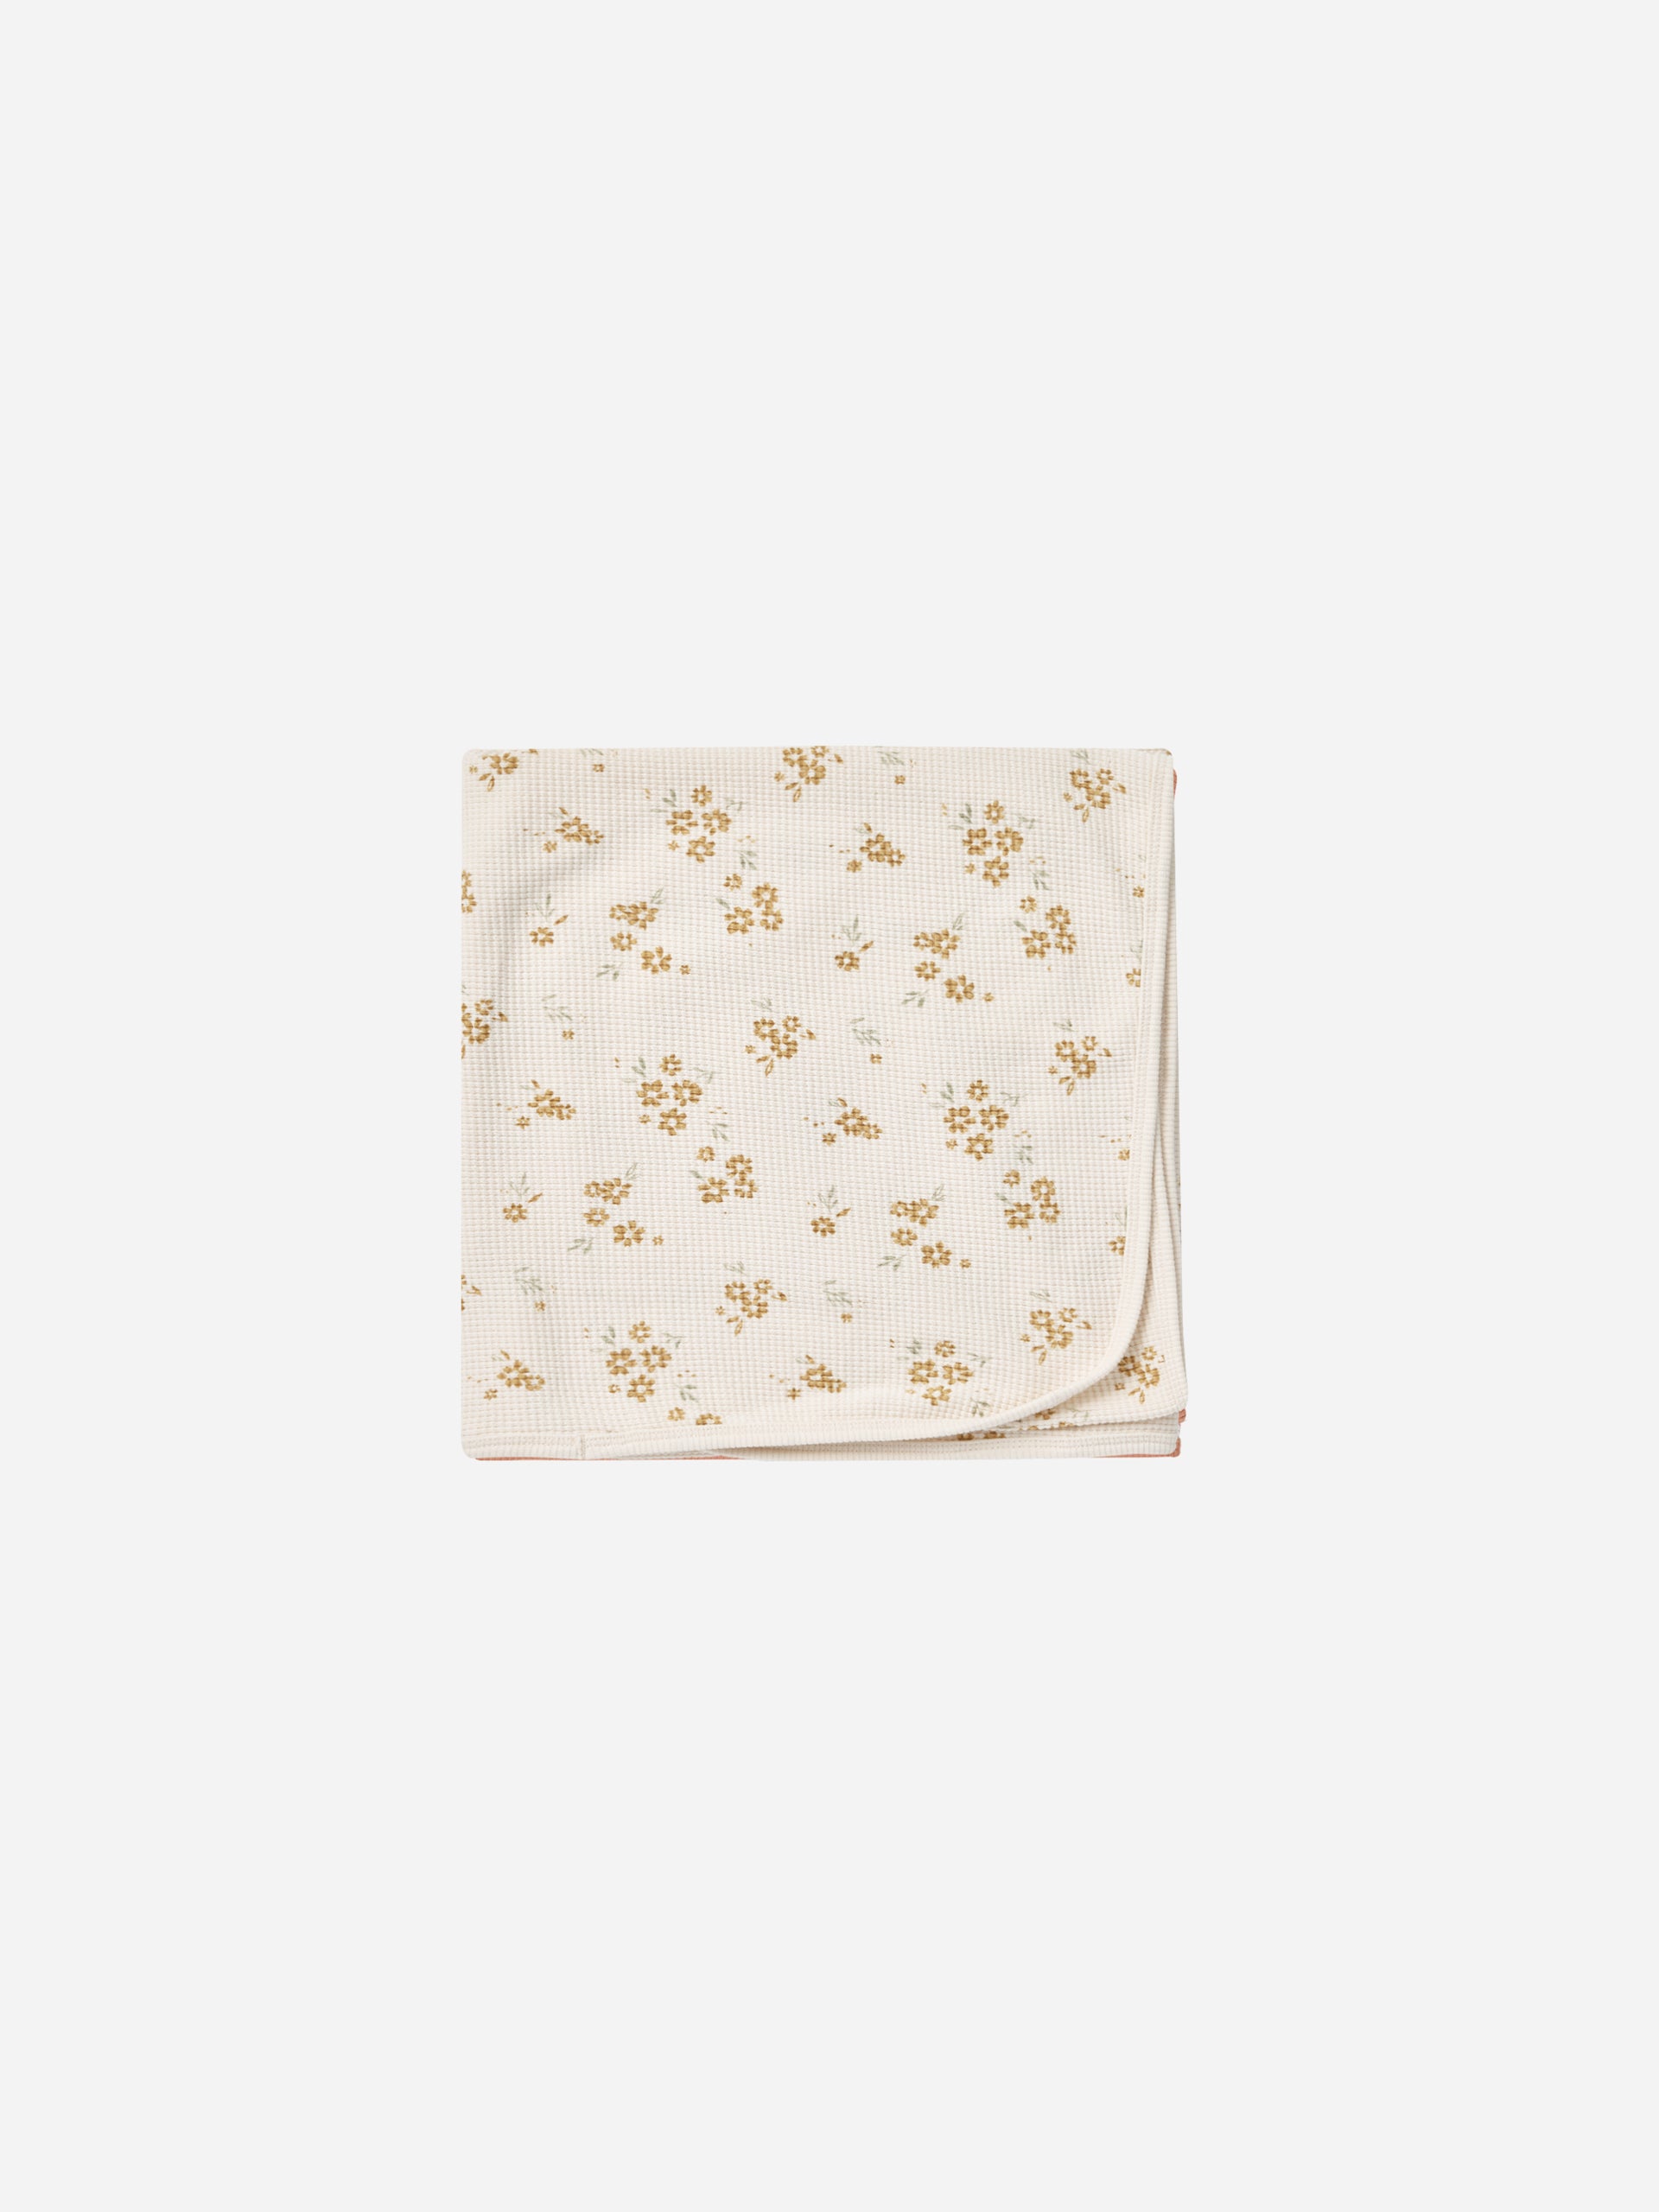 Baby Blanket || Honey Flower - Rylee + Cru | Kids Clothes | Trendy Baby Clothes | Modern Infant Outfits |